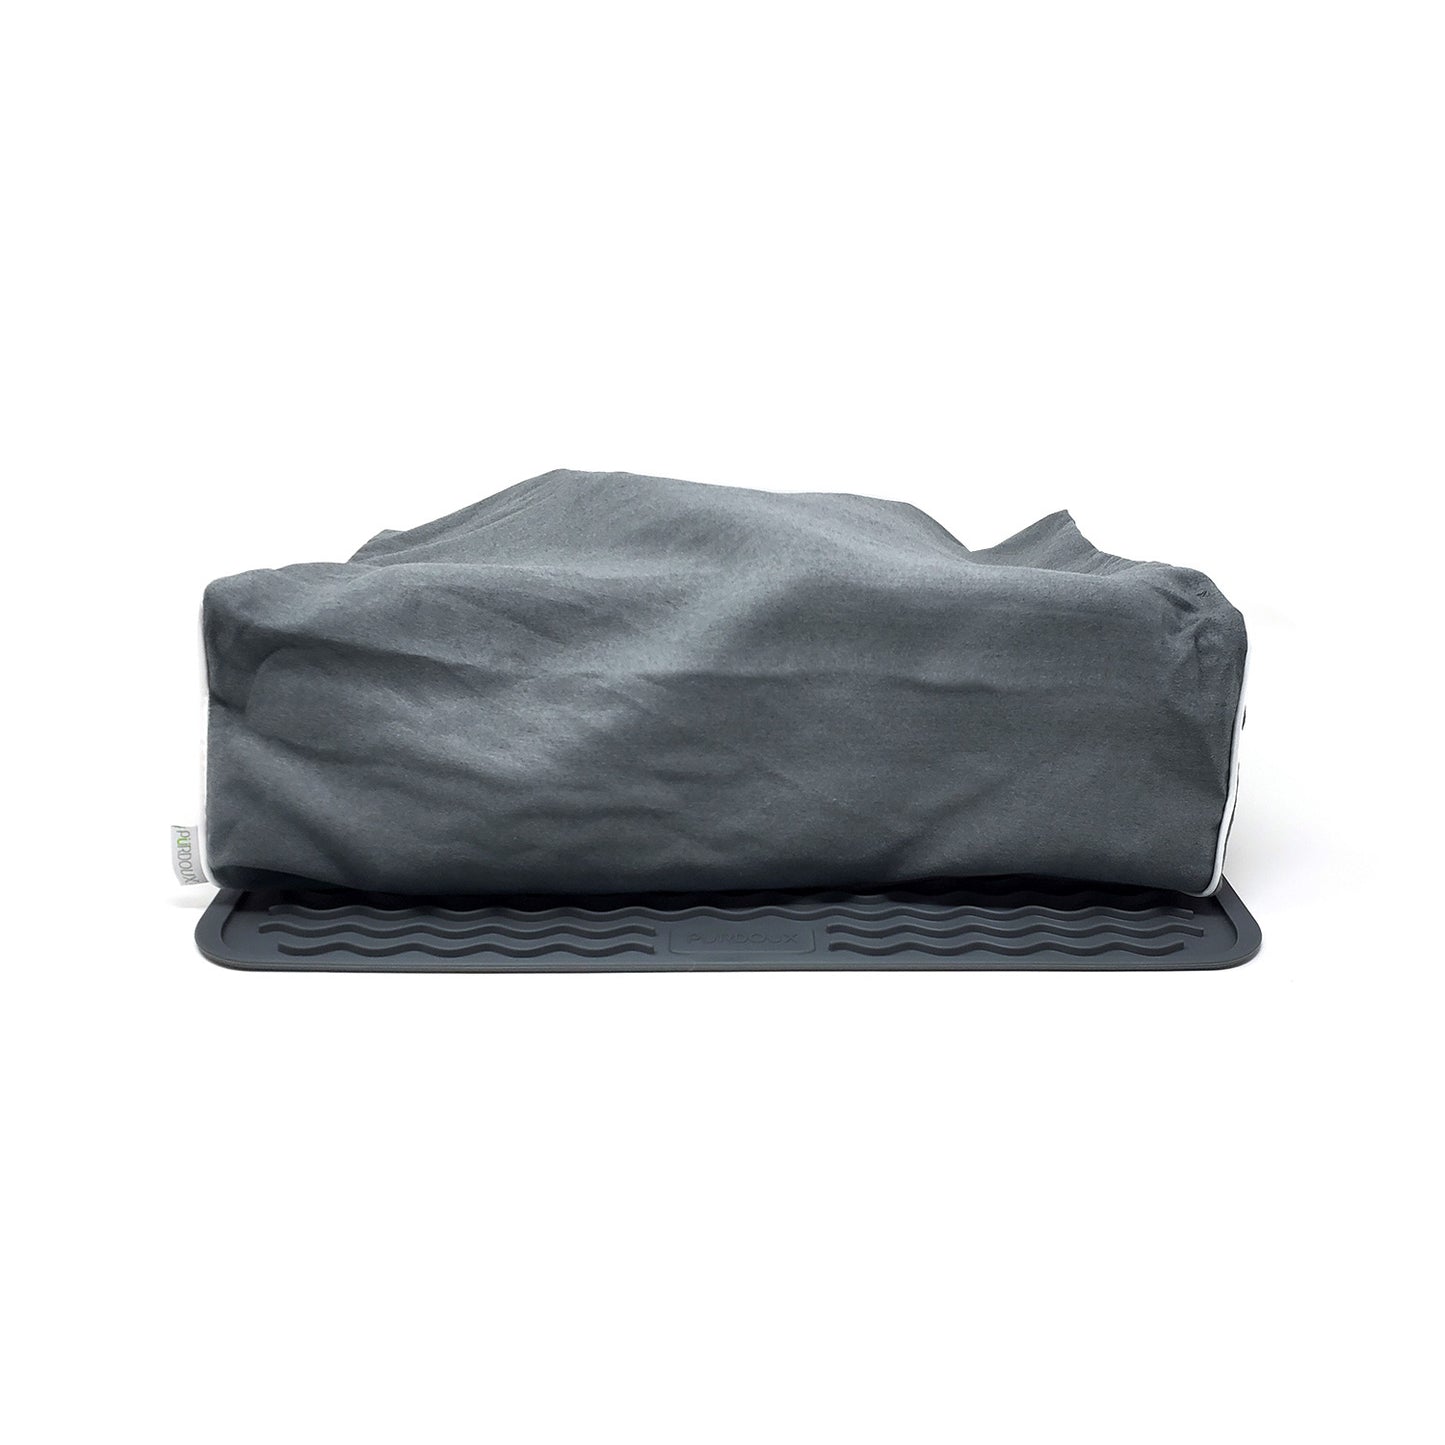 PURDOUX CPAP dust Cover & Protector Mat - cover